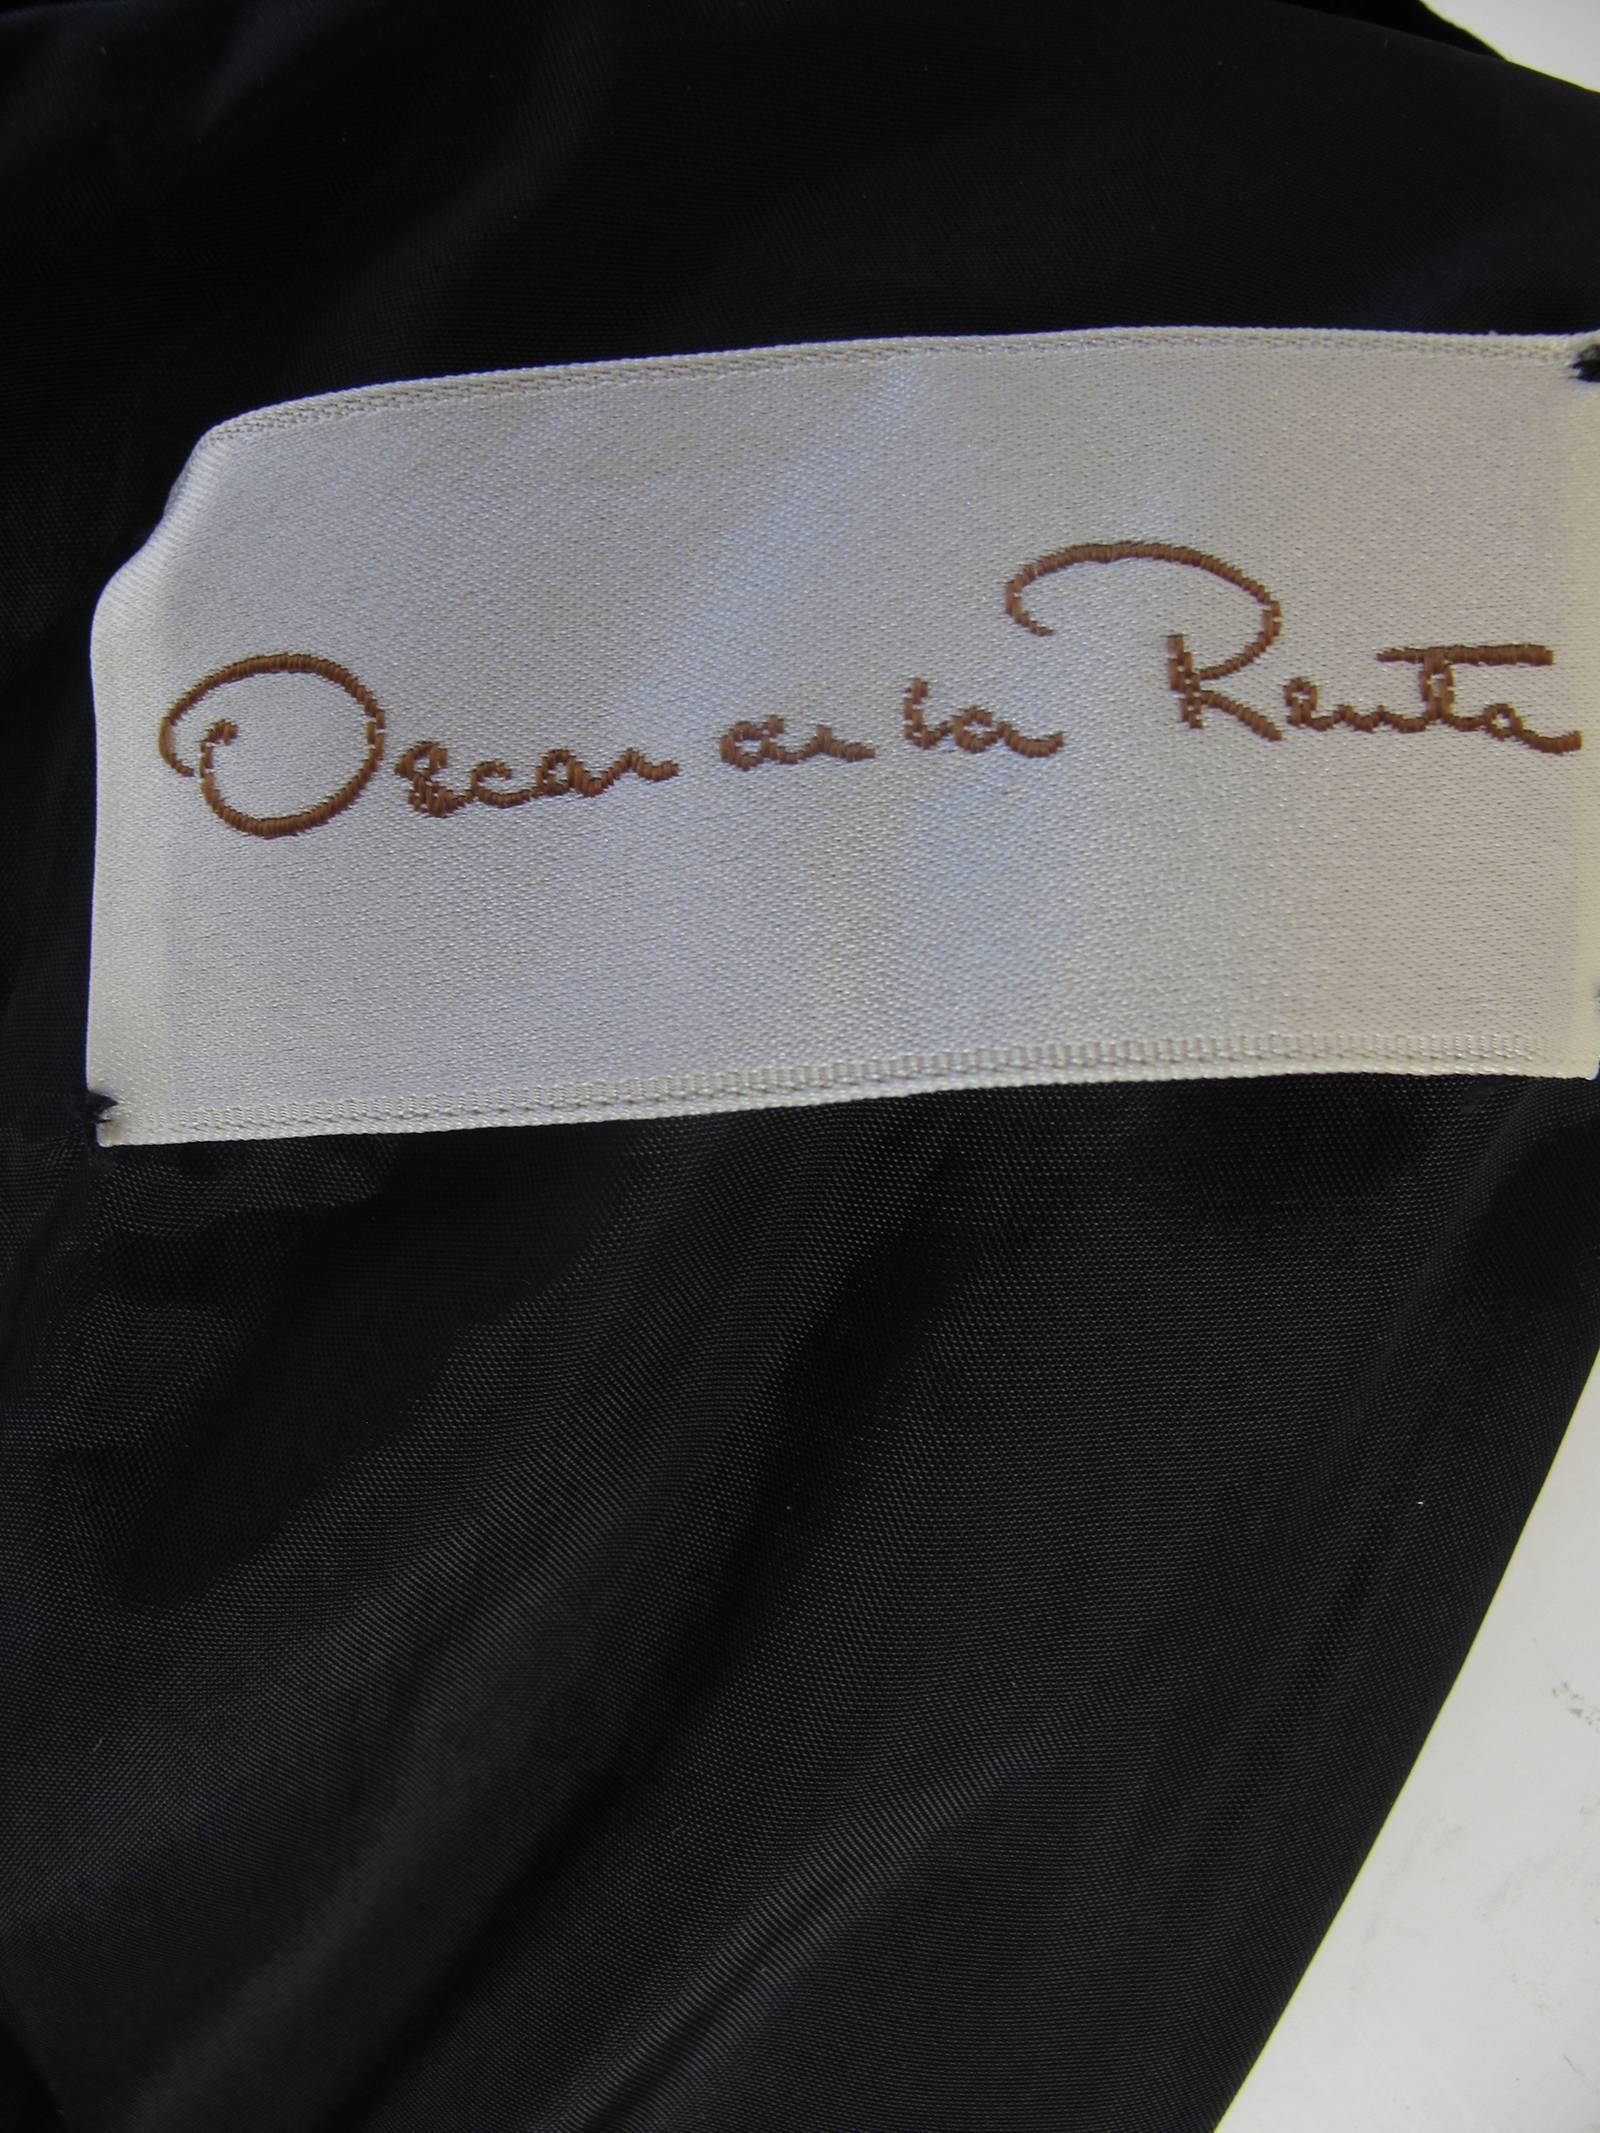 1980s Oscar de la Renta black velvet and blue satin ballgown. Condition: Very good. Size 6

We accept returns for refund, please see our terms.  We offer free ground shipping within the US. 